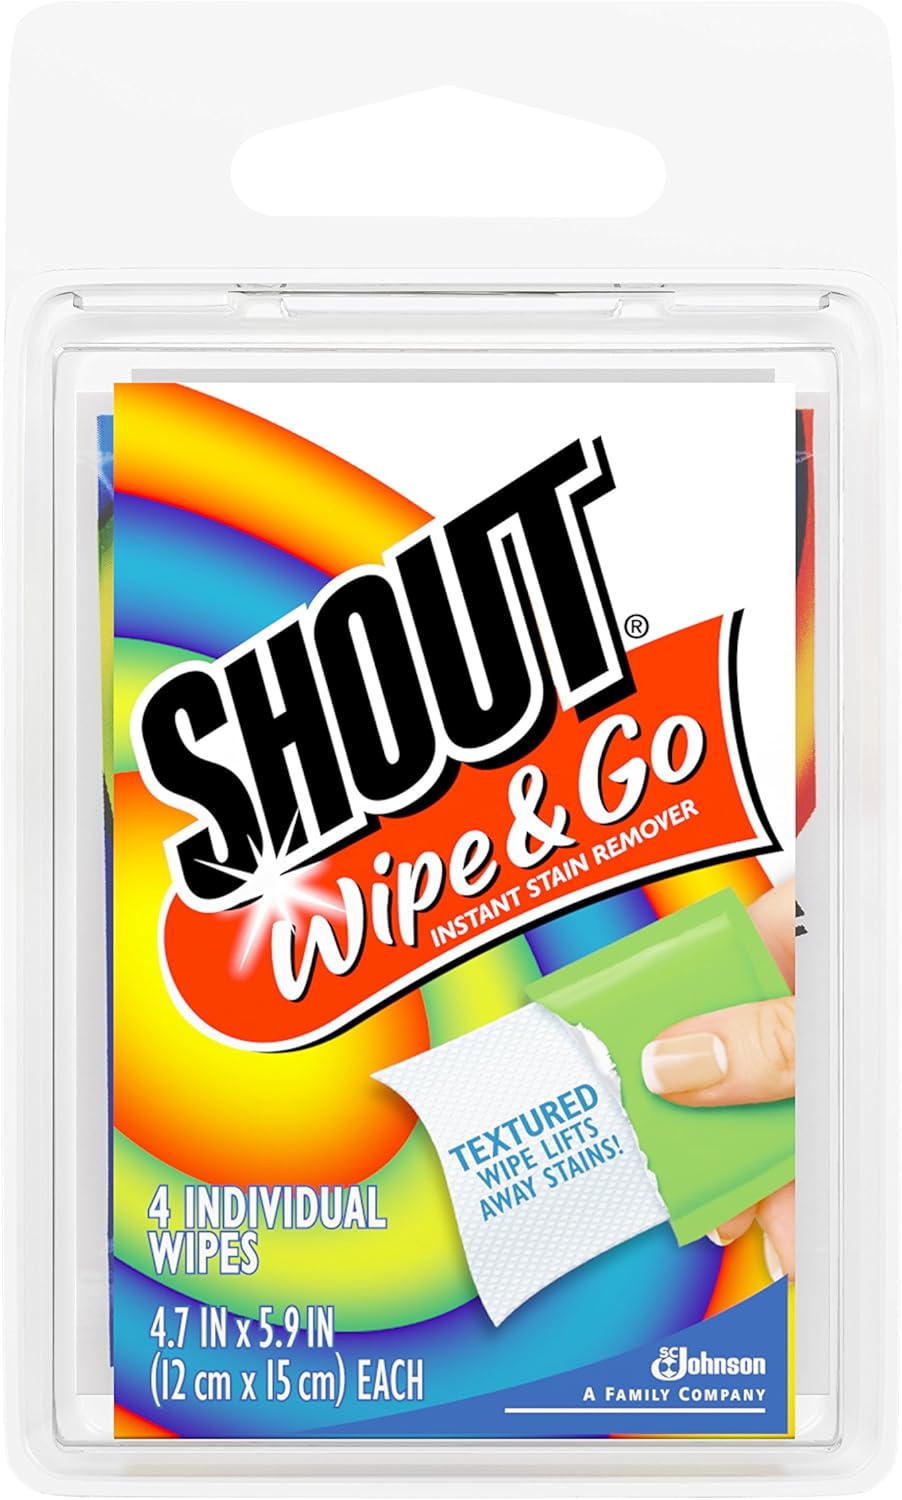 Shout Wipes, Wipe and Go Instant Stain Remover, Laundry Stain and Spot Remover for On-the-Go, 4 Wipes (Pack of 1)